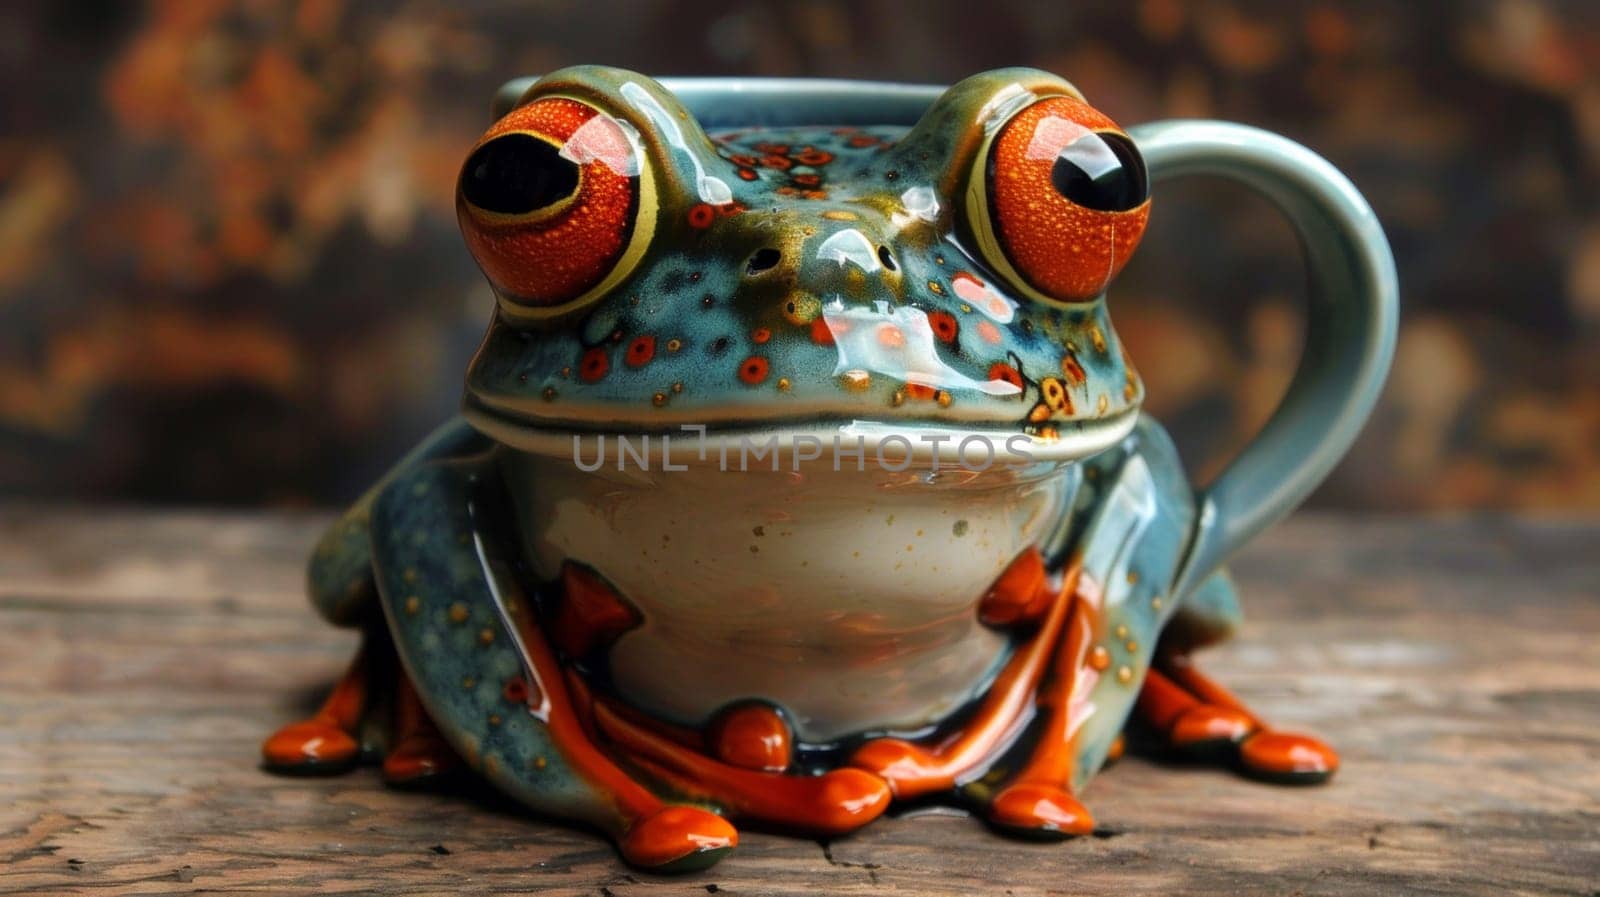 A ceramic mug with a frog sitting on top of it